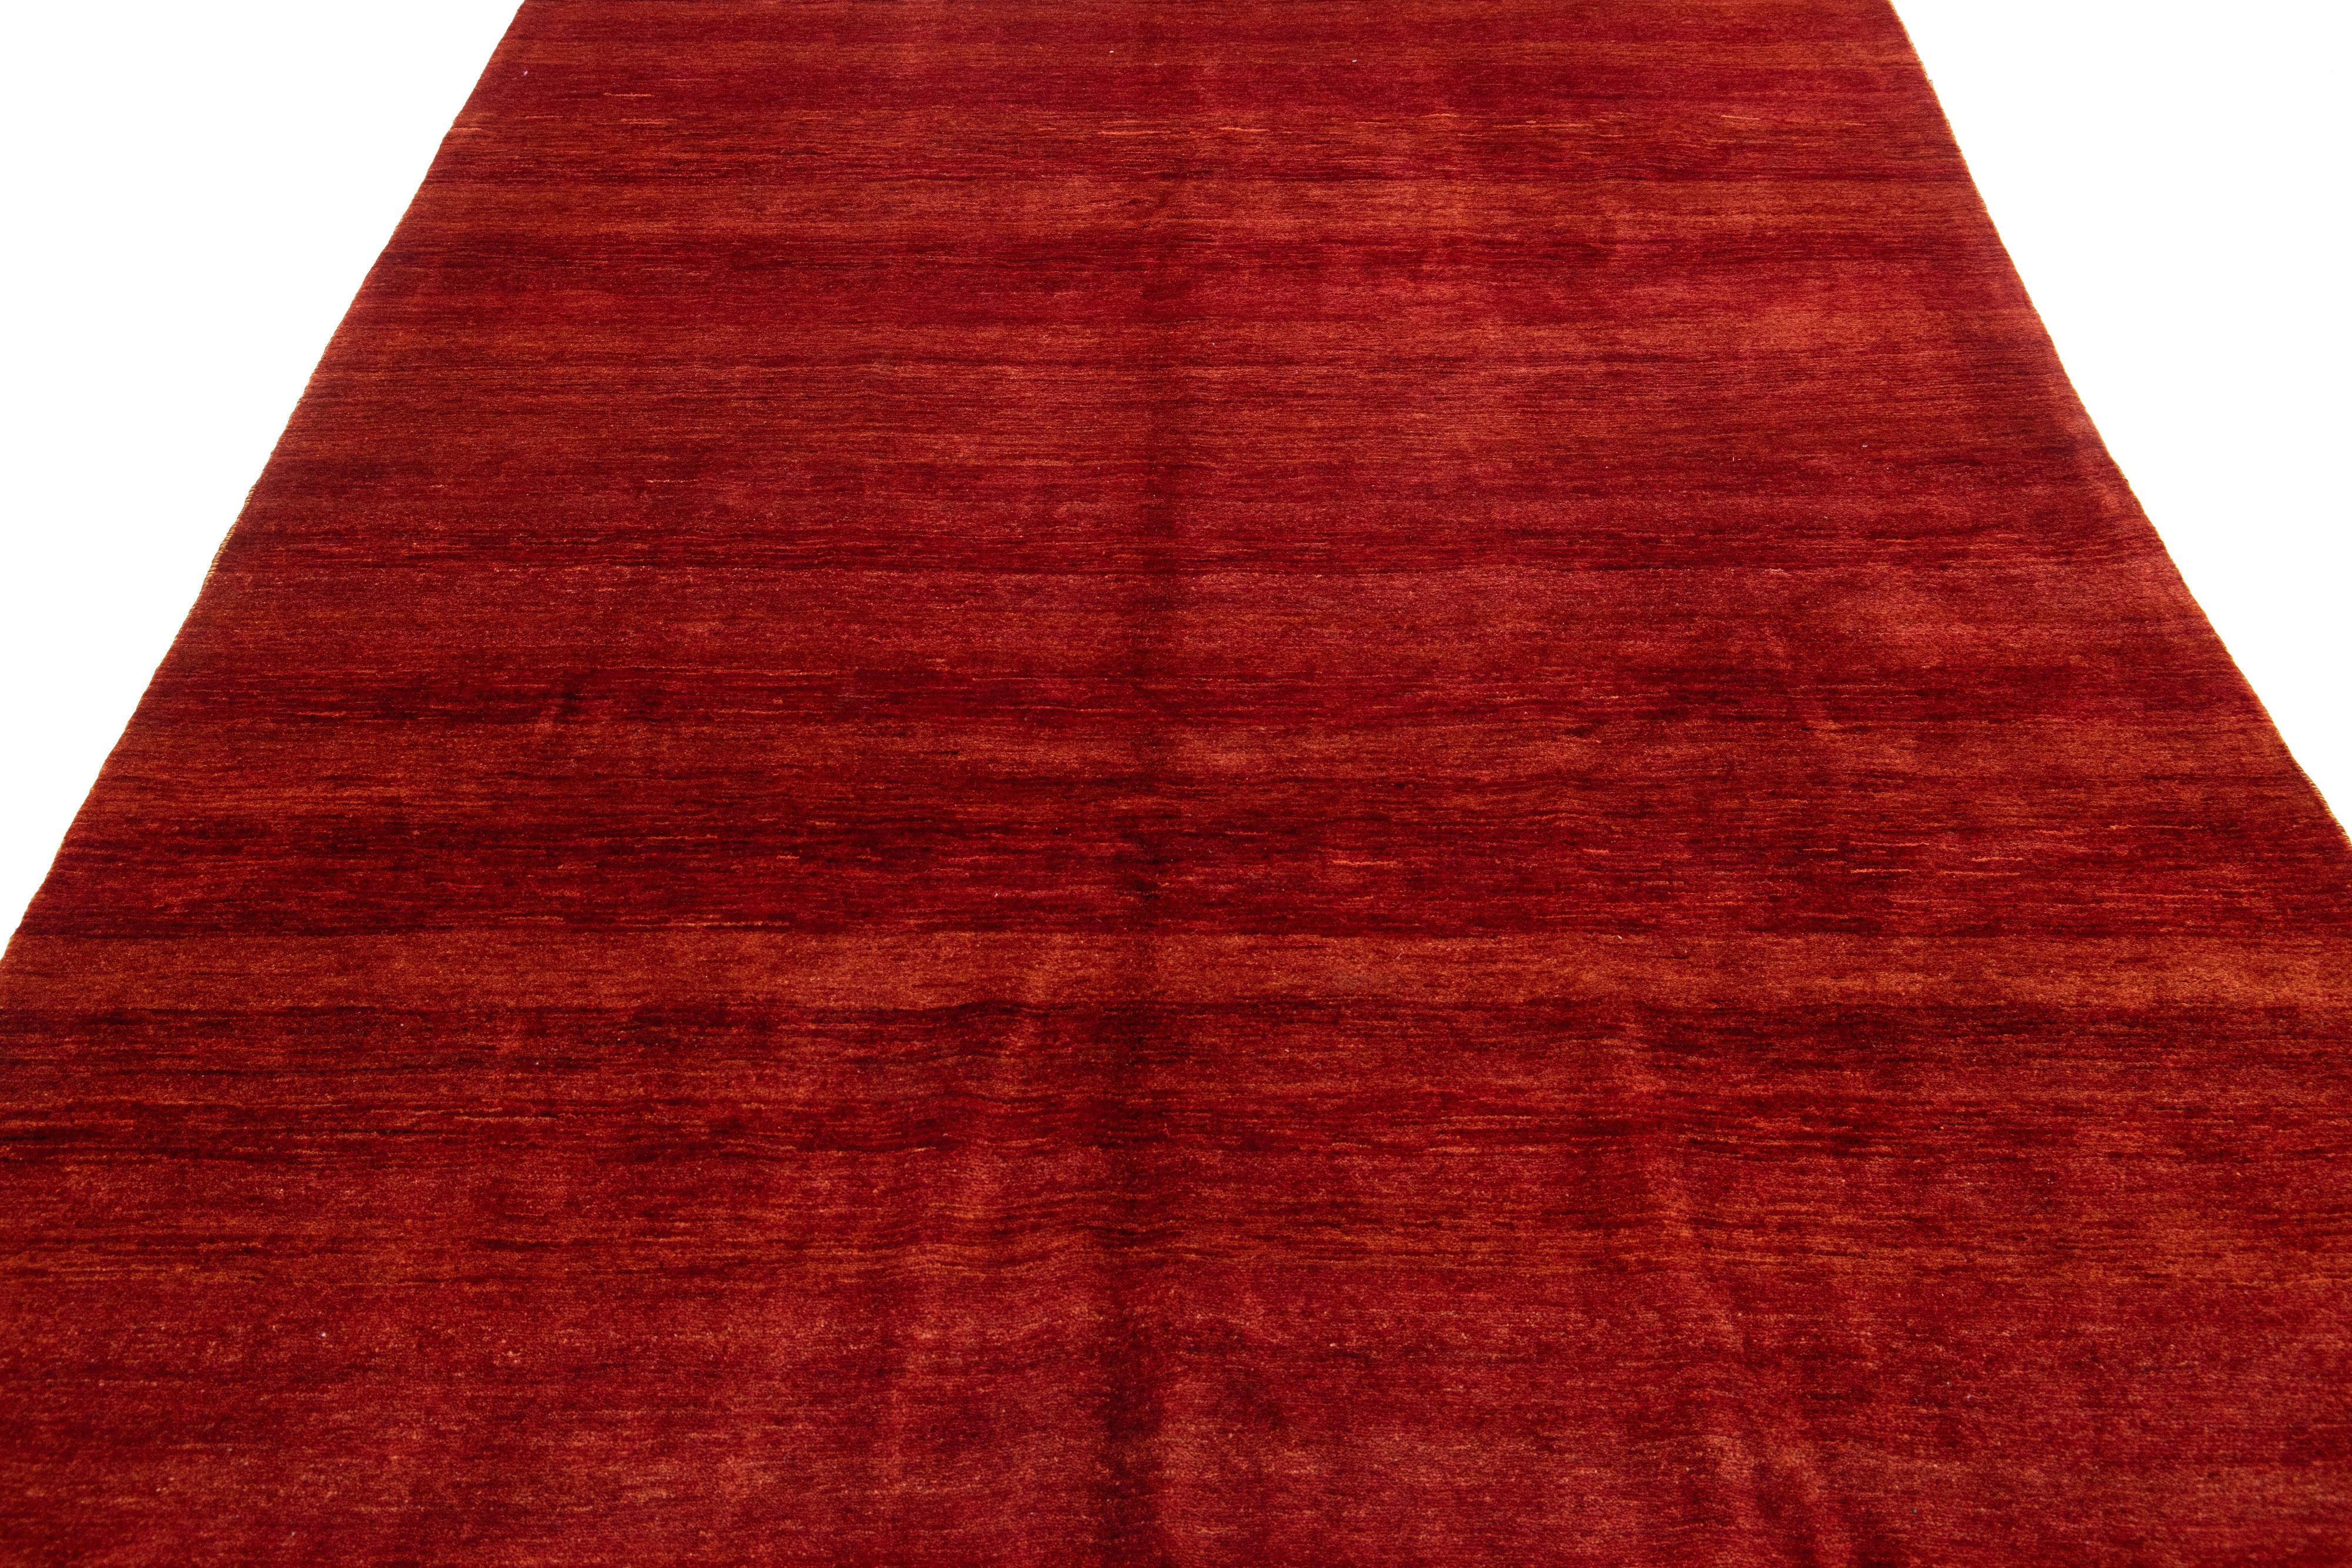 Beautiful modern Gabbeh-style hand-knotted wool rug with a red-rust color field. This piece has a gorgeous all-over solid design.

This rug measures: 6'9